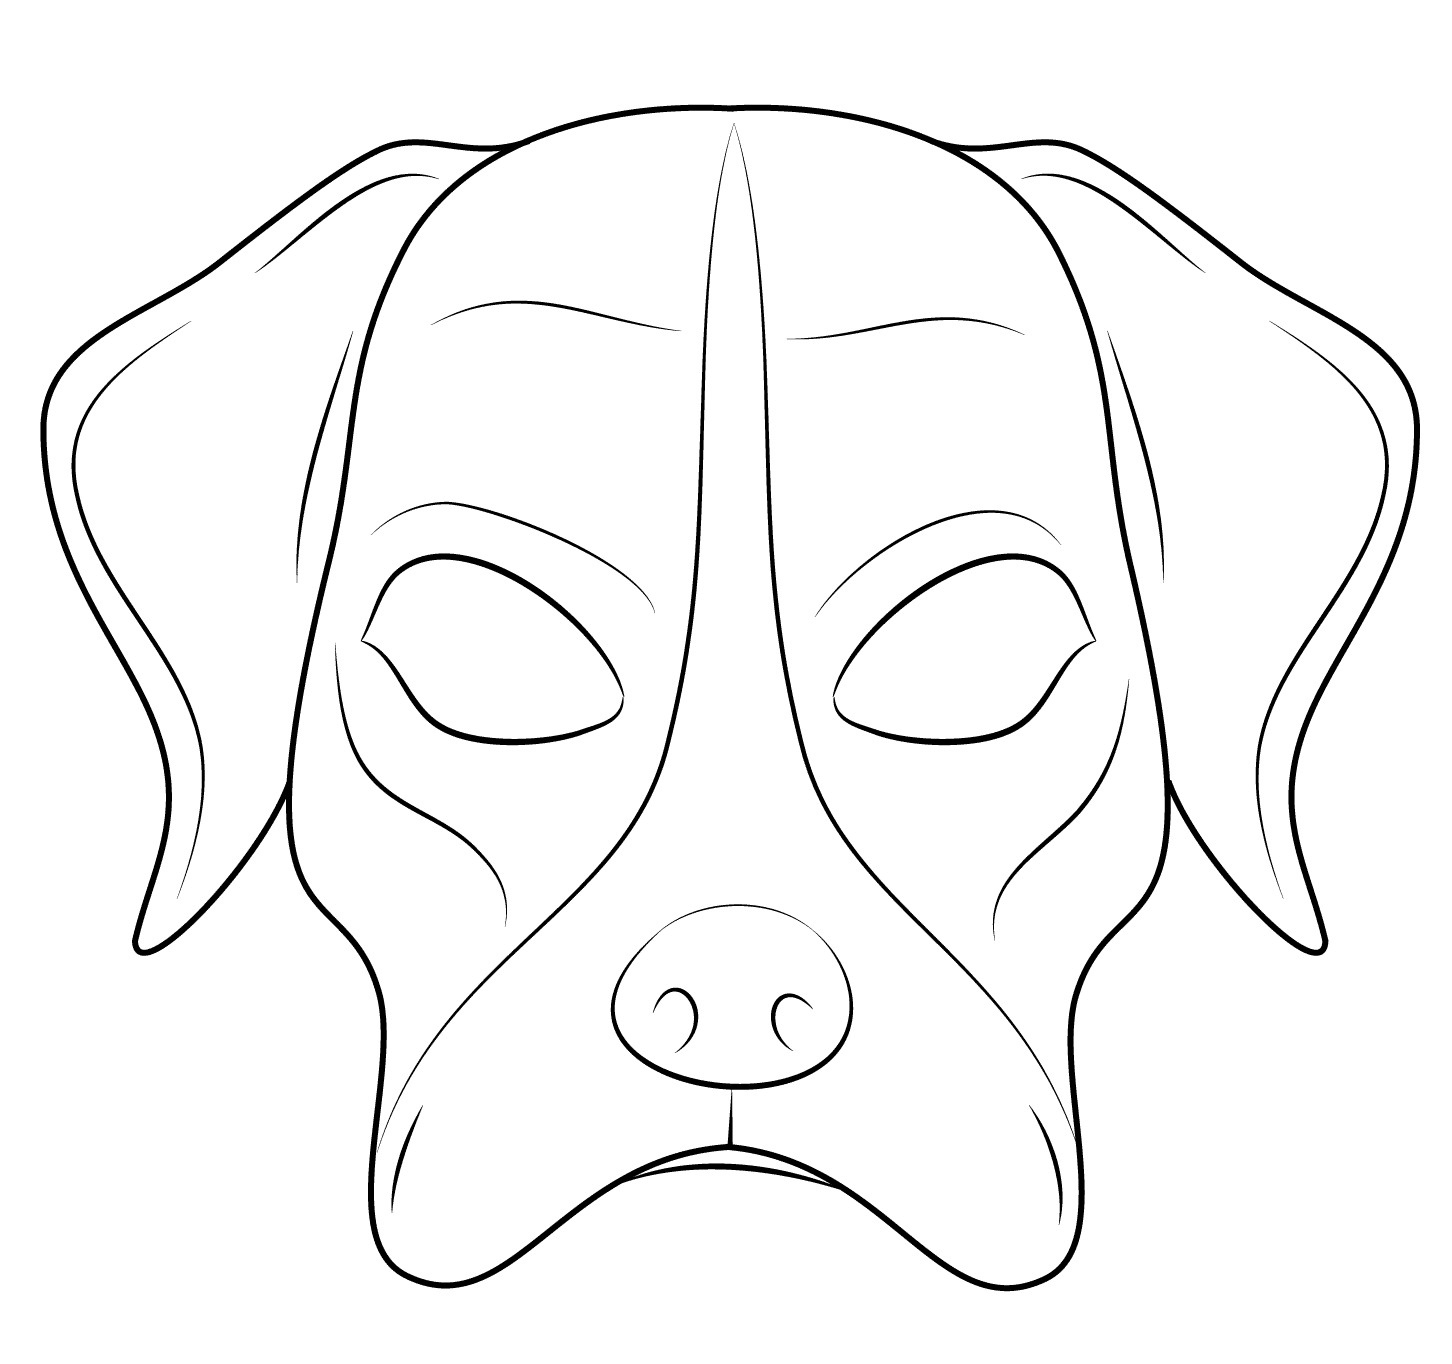 Dog mask from Dogs